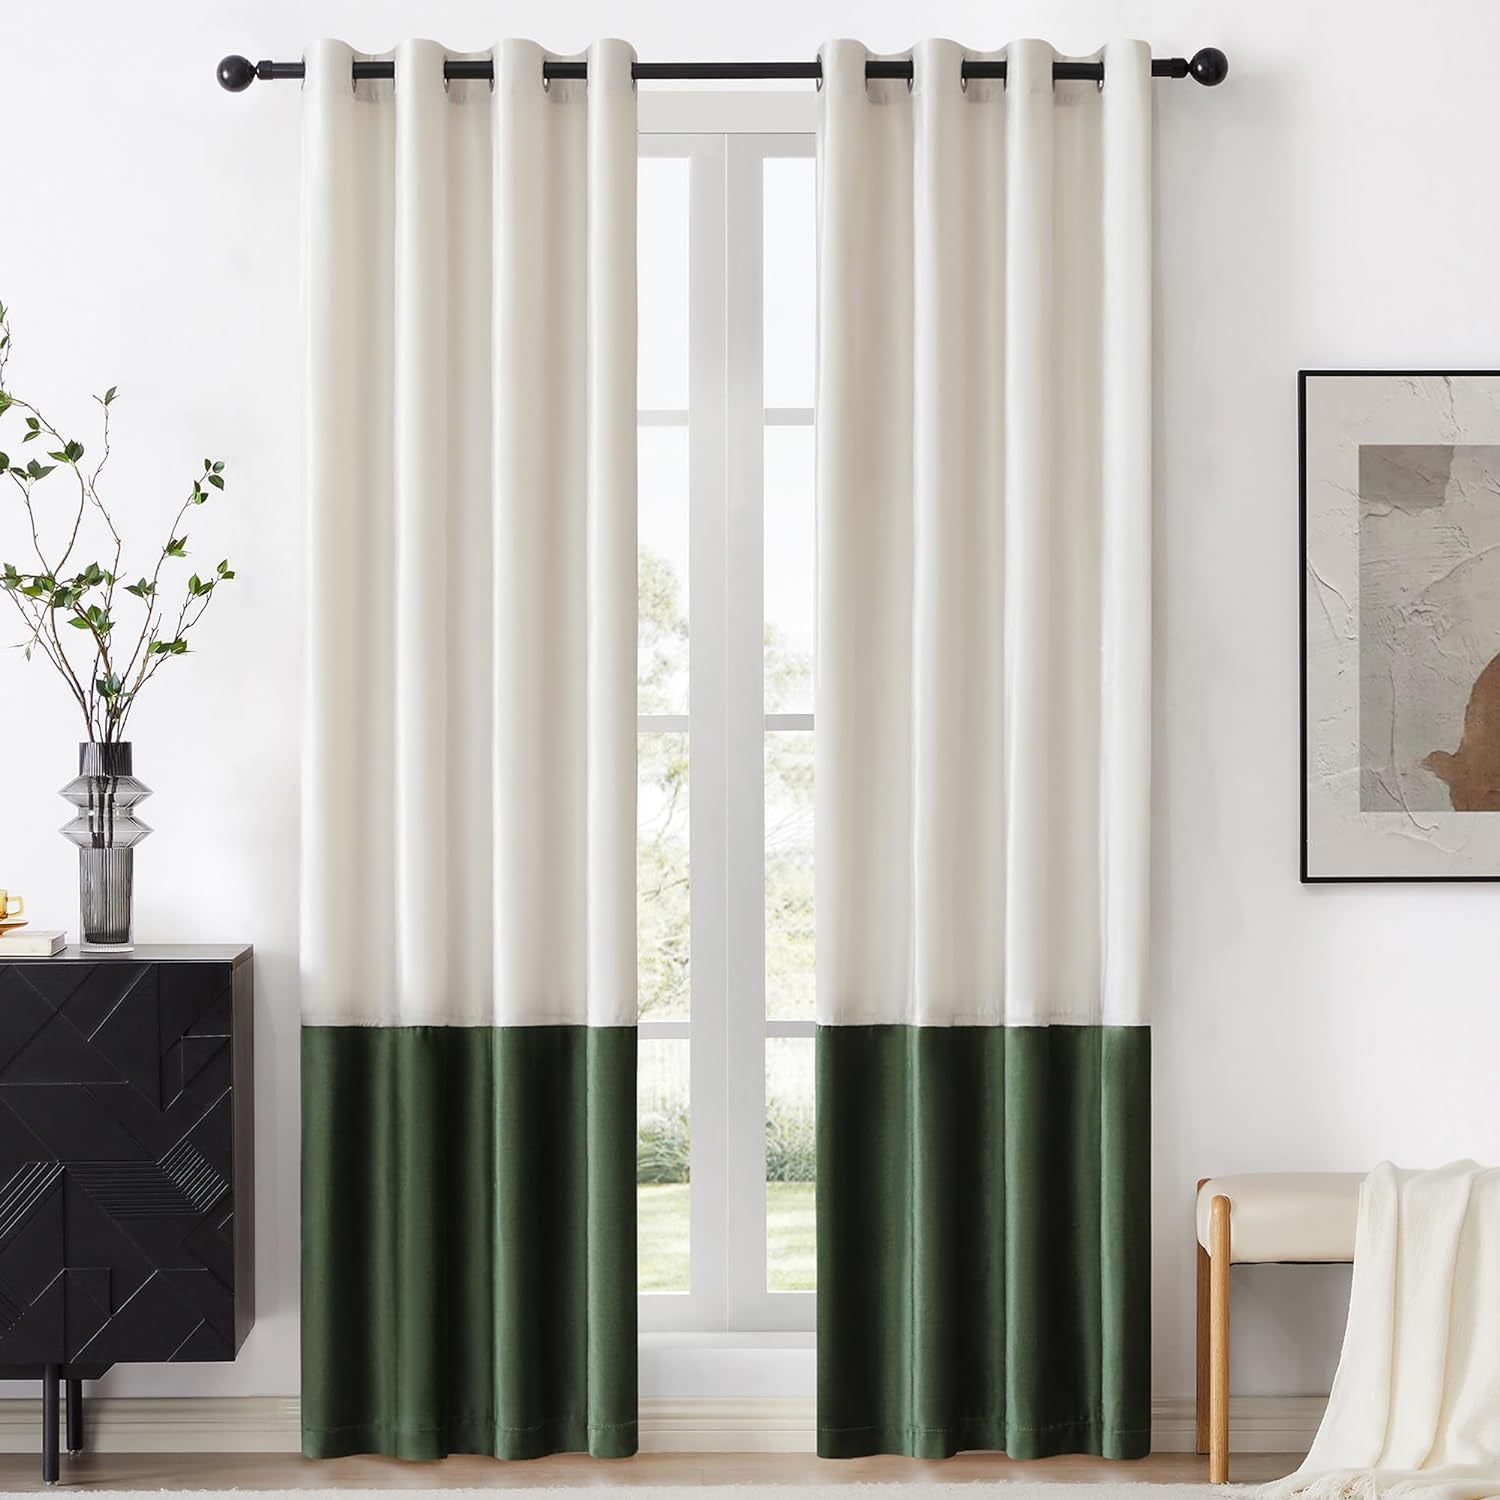 BULBUL Black Gold Color Block Window Curtains Panels 84 Inches Long Velvet Farmhouse Drapes for Bedroom Living Room Darkening Treatment with Grommet Set of Black Gold  BULBUL Cream  Olive Green 52"W X 84"L 